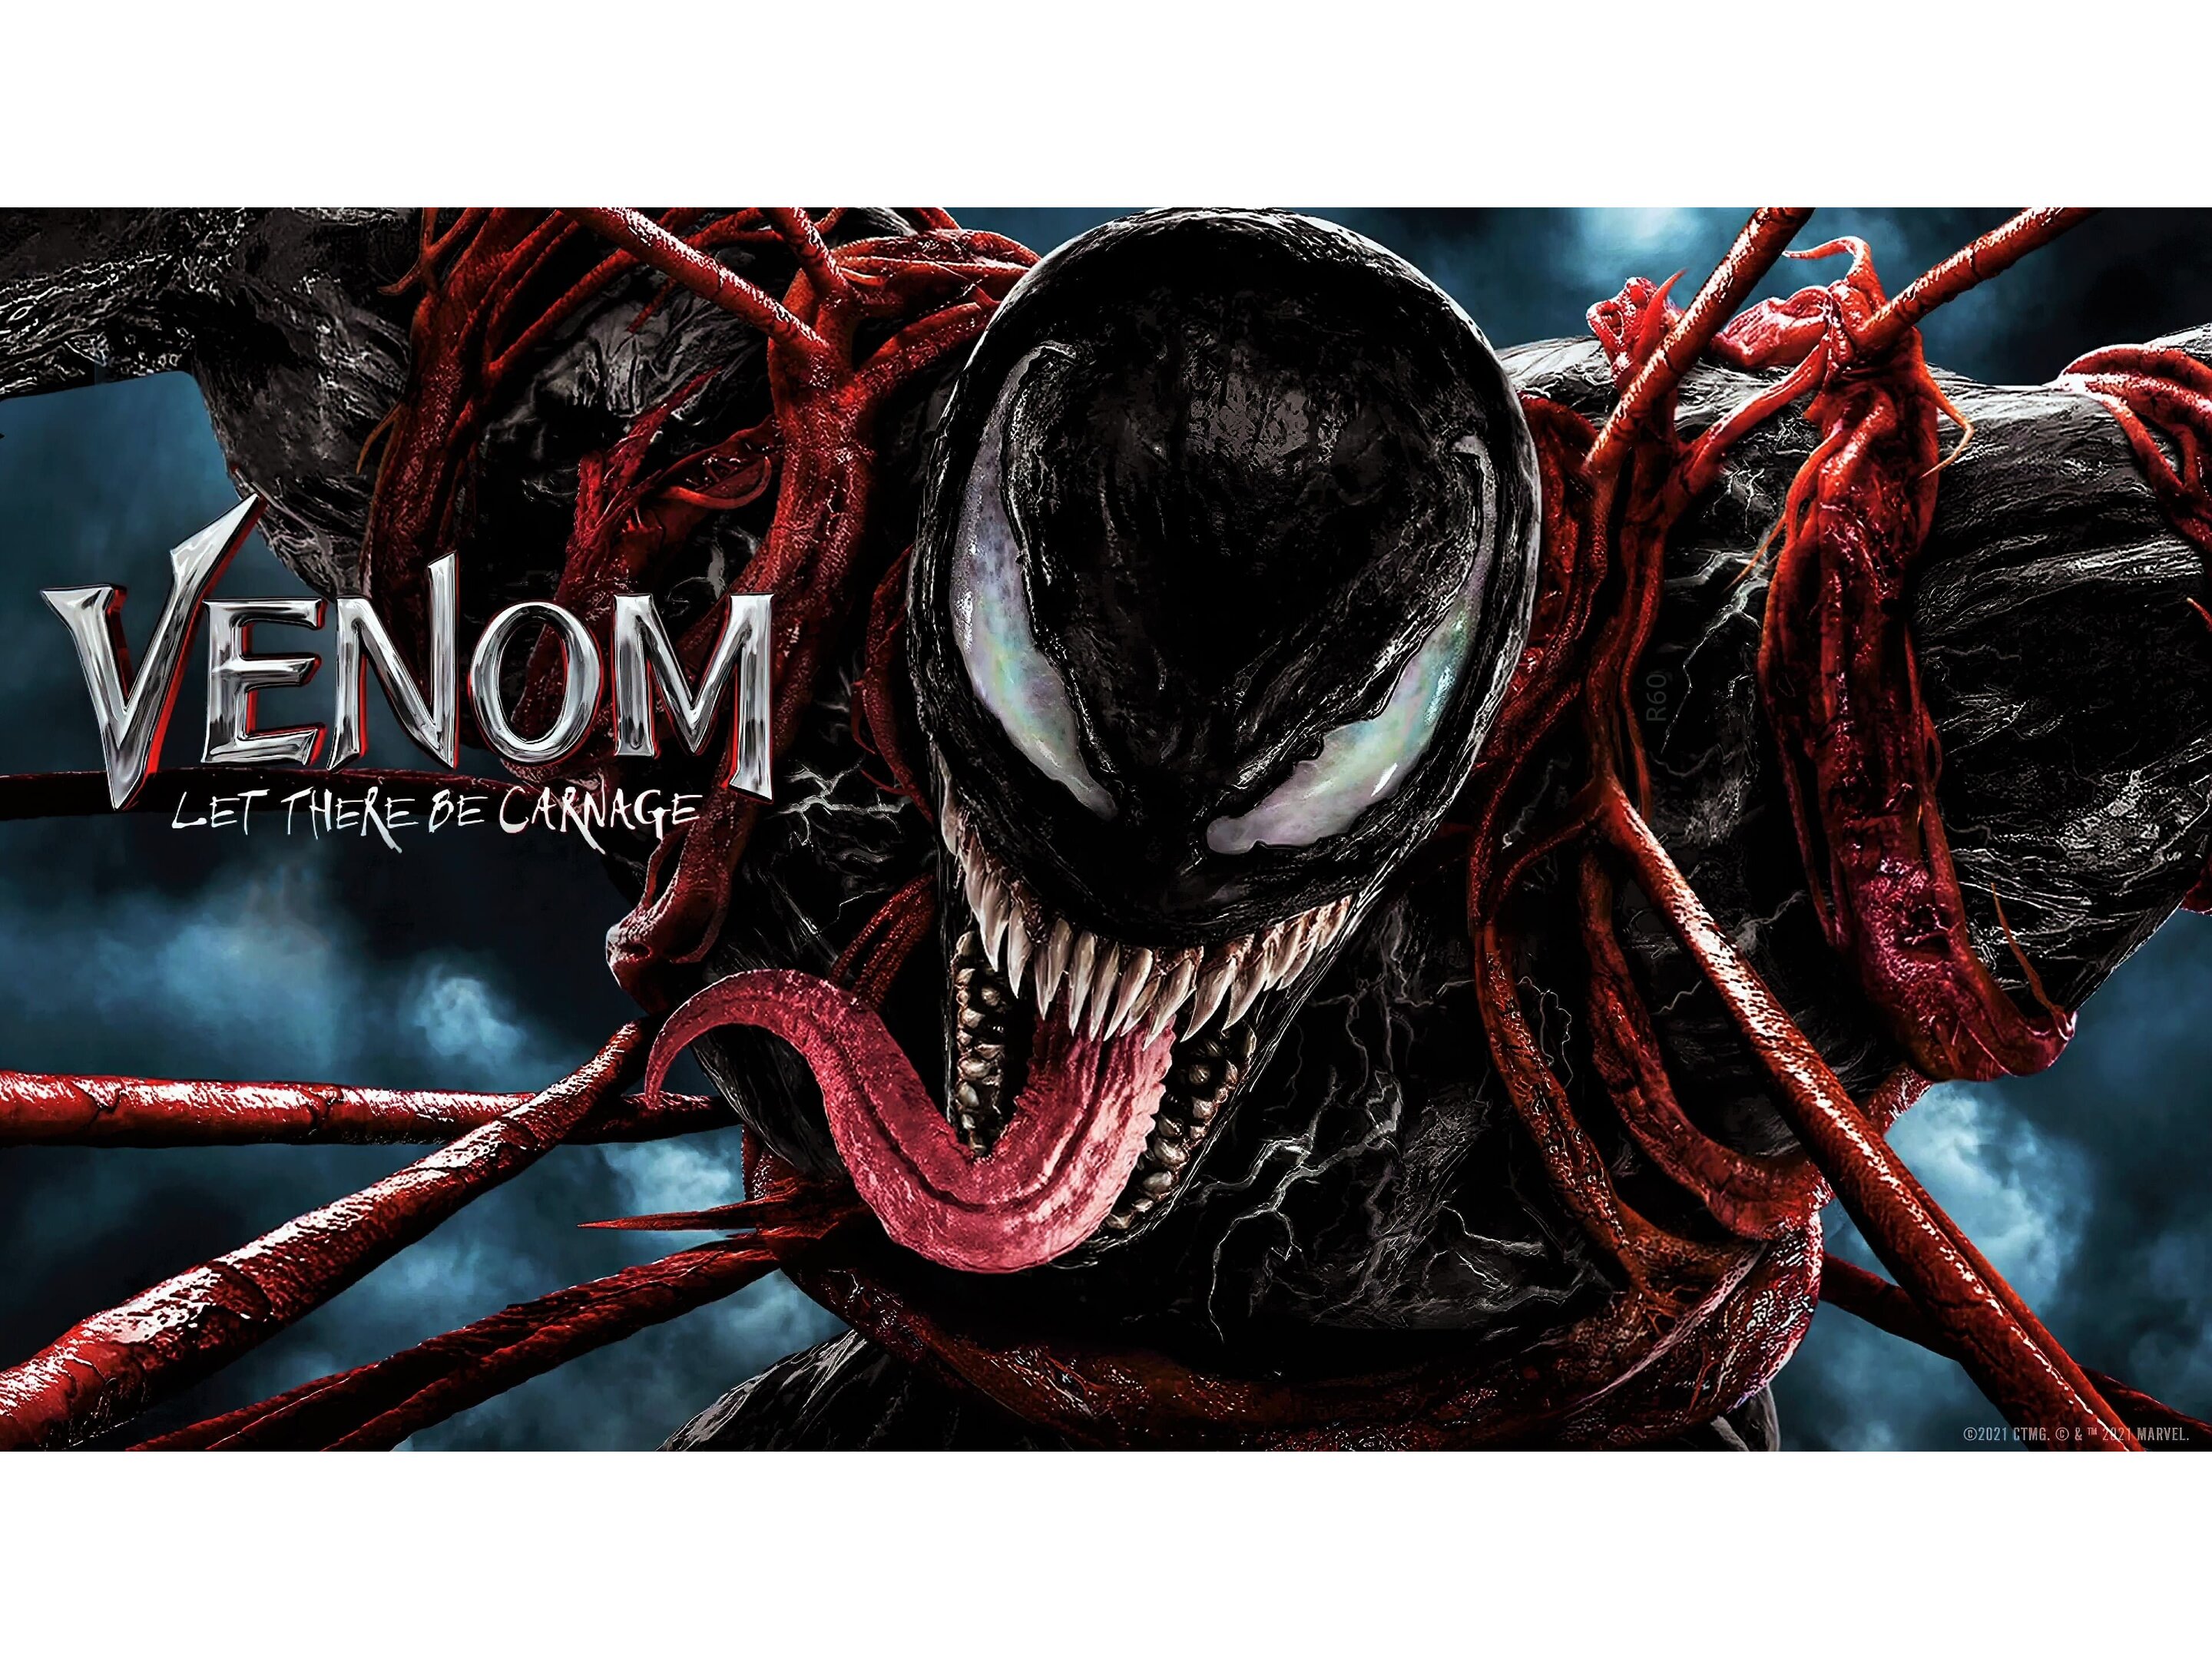 123MOVIES- [WATCH] VENOM 2 : LET THERE BE CARNAGE |2021| MOVIE ONLINE FULL FOR FREE DOWNLOAD OFFICIALLY